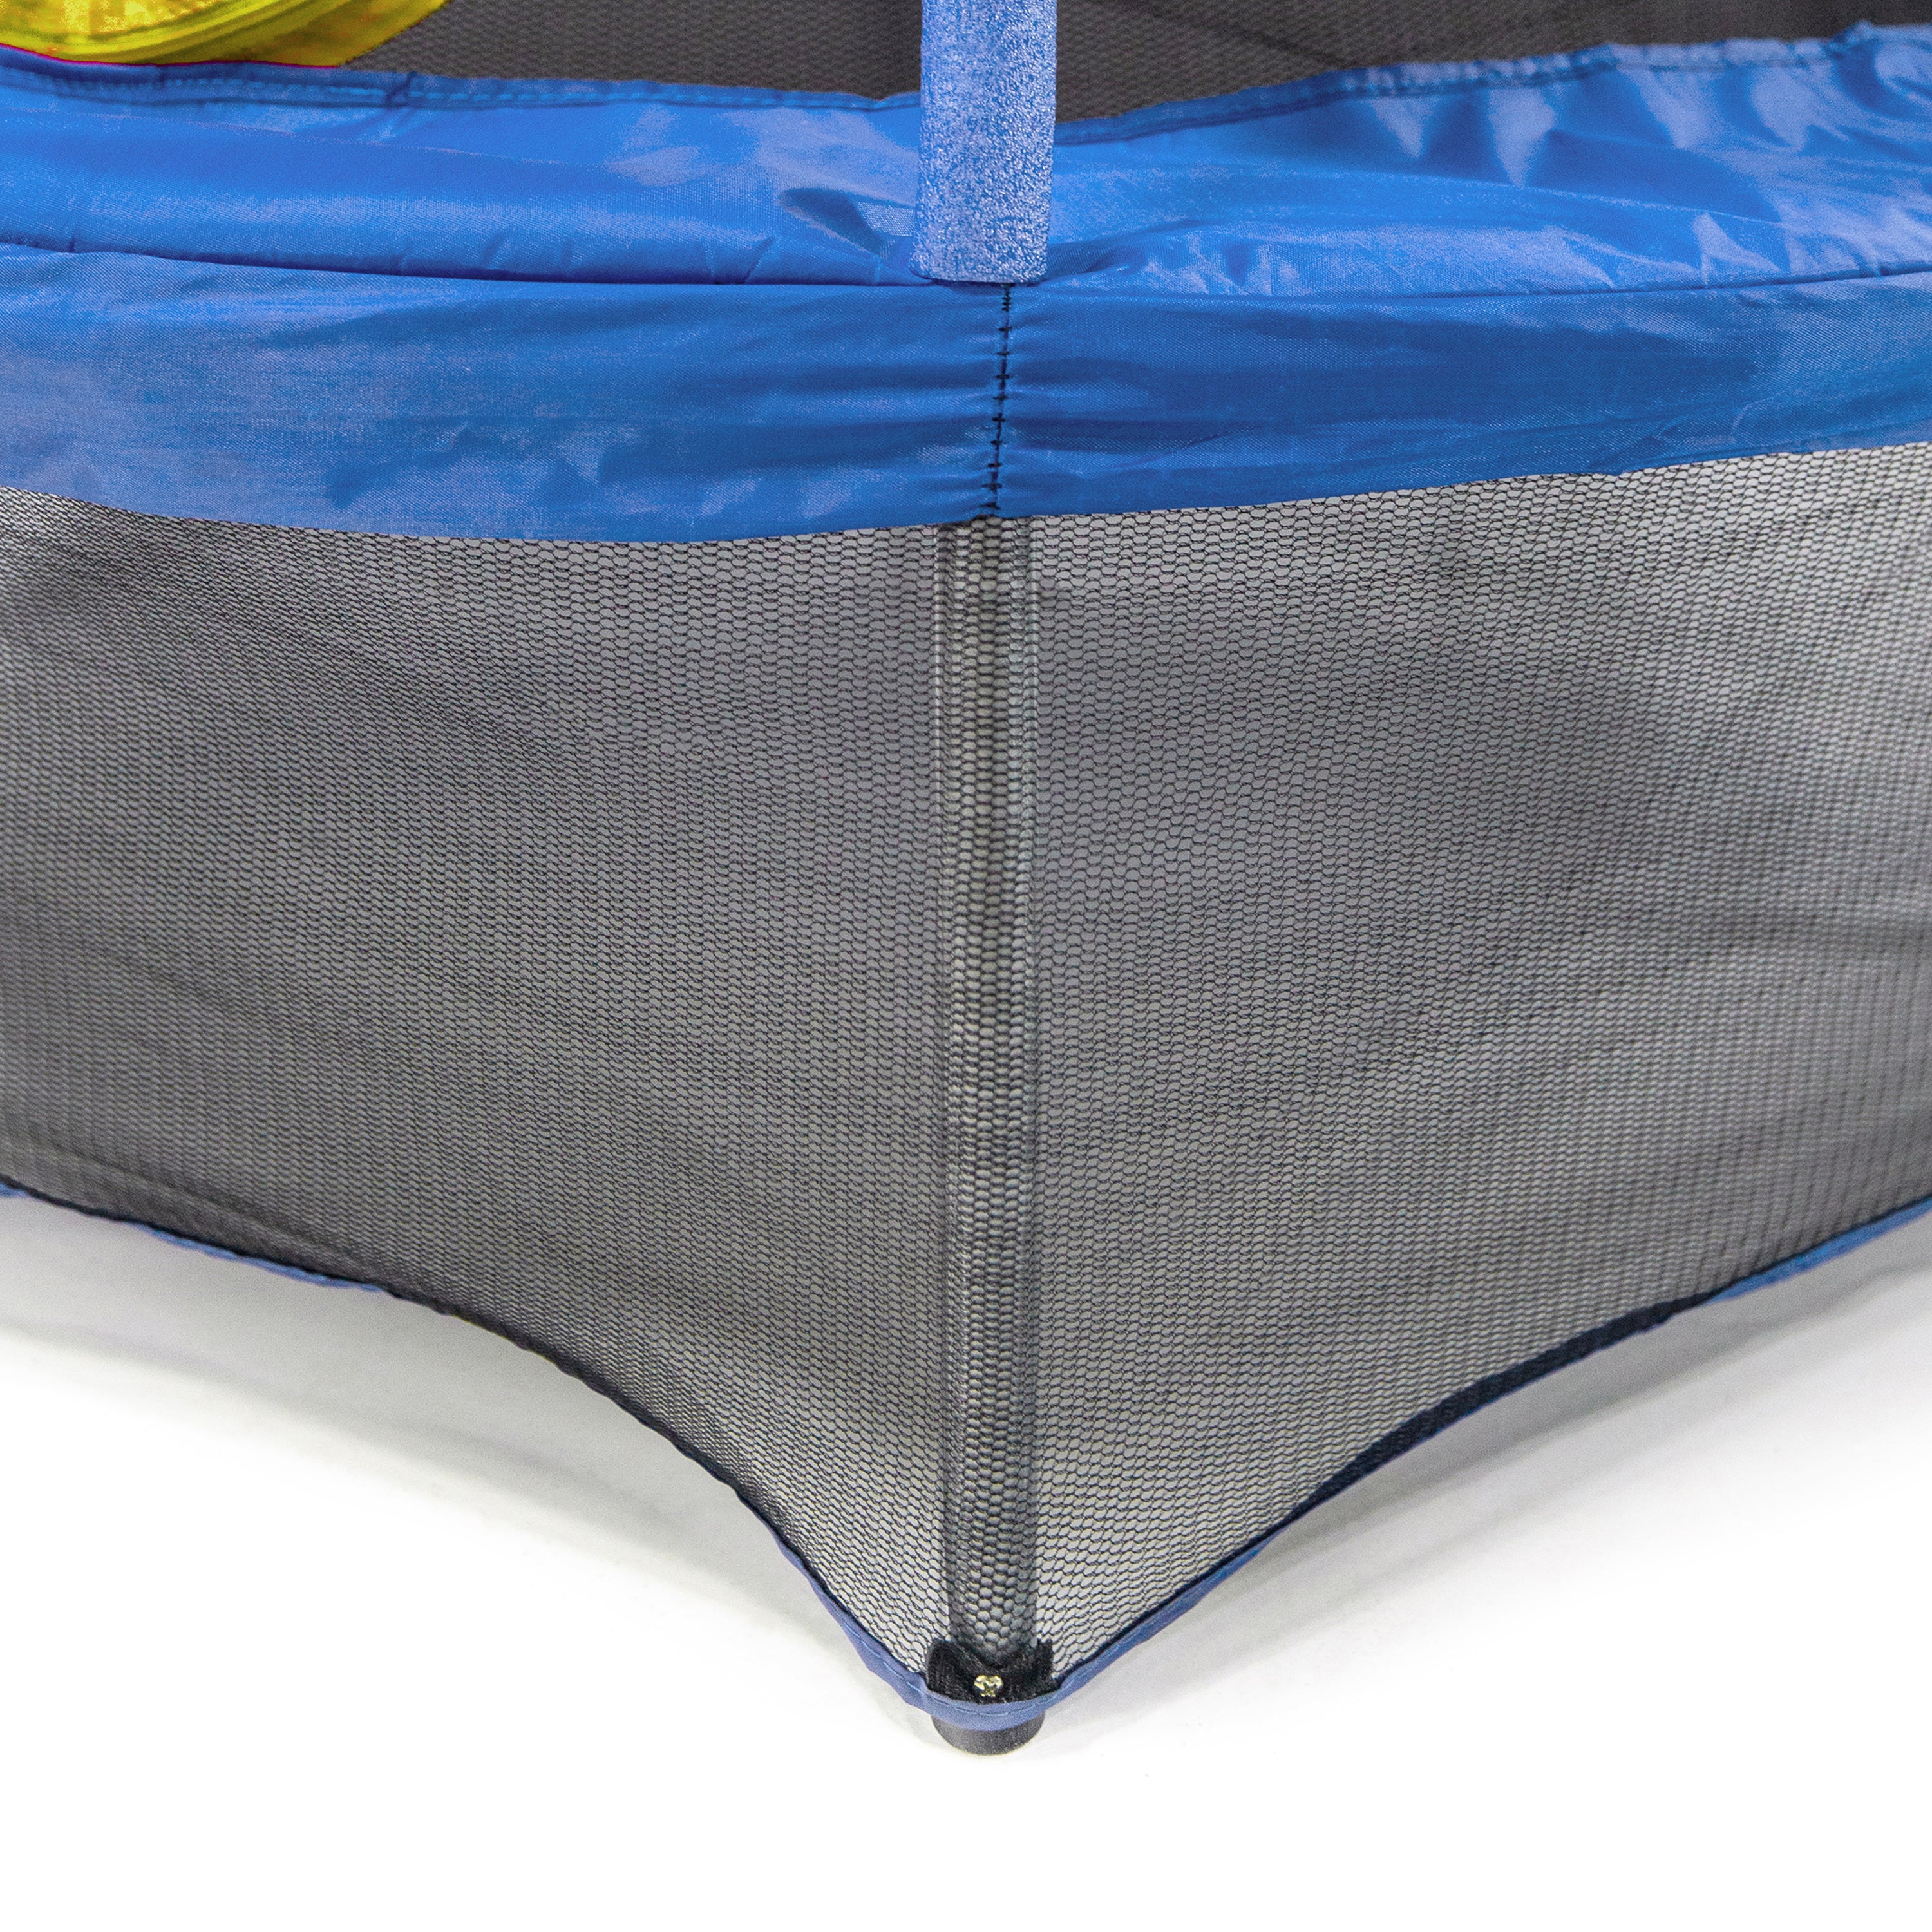 Black enclosure net hangs below the blue frame pad and covers the mini trampoline's legs. 